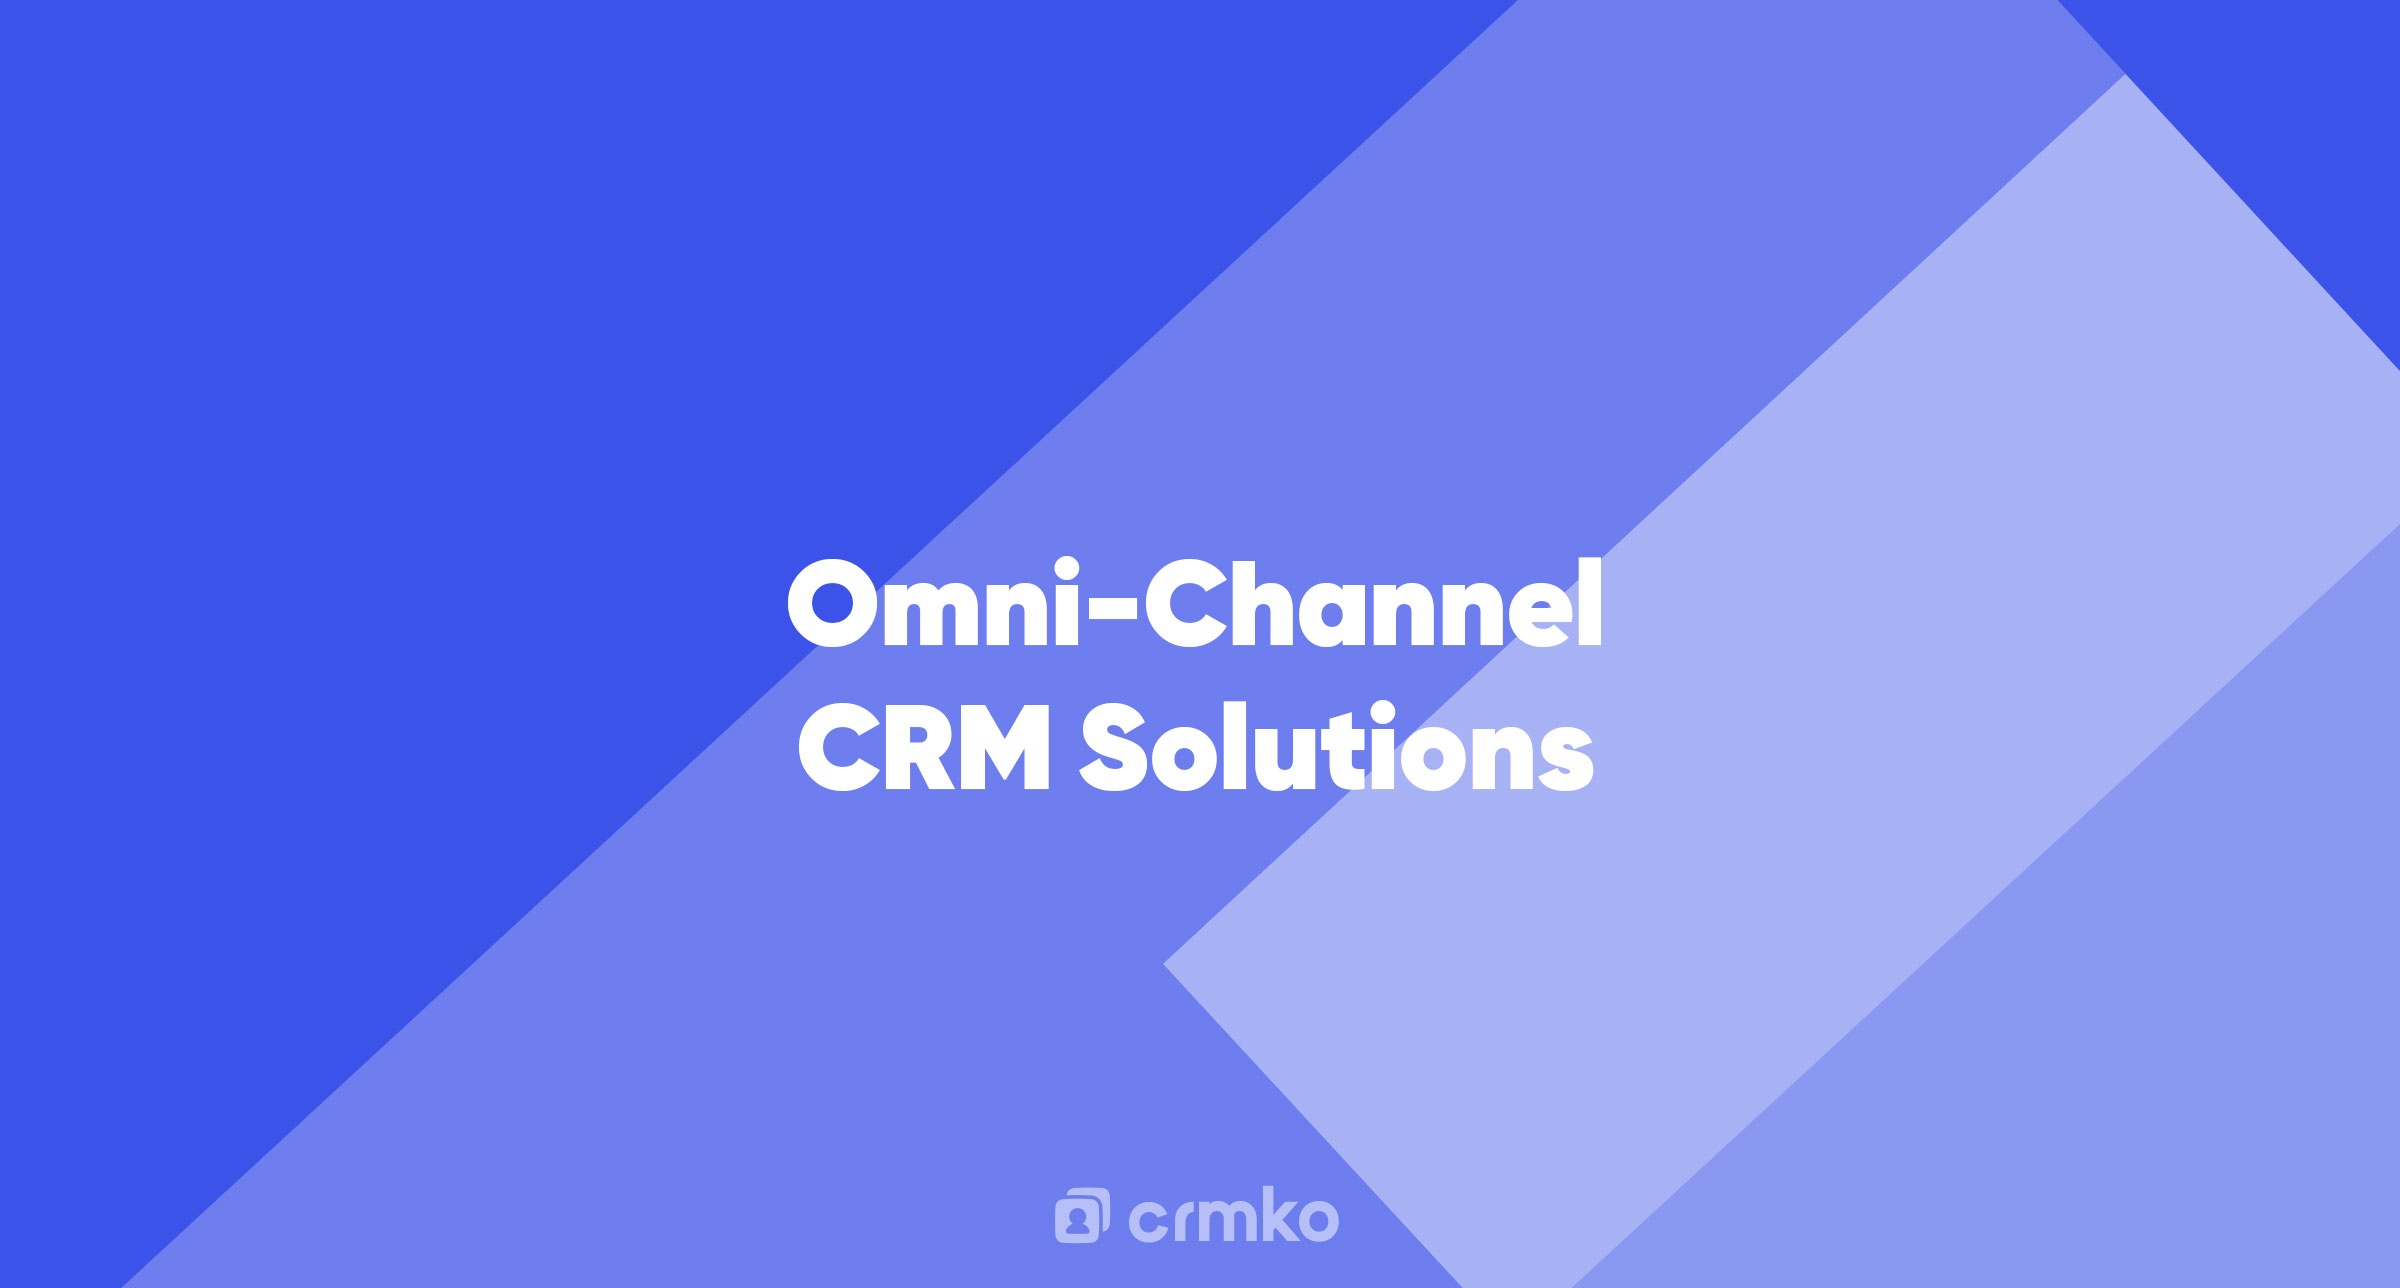 Article | Omni-Channel CRM Solutions